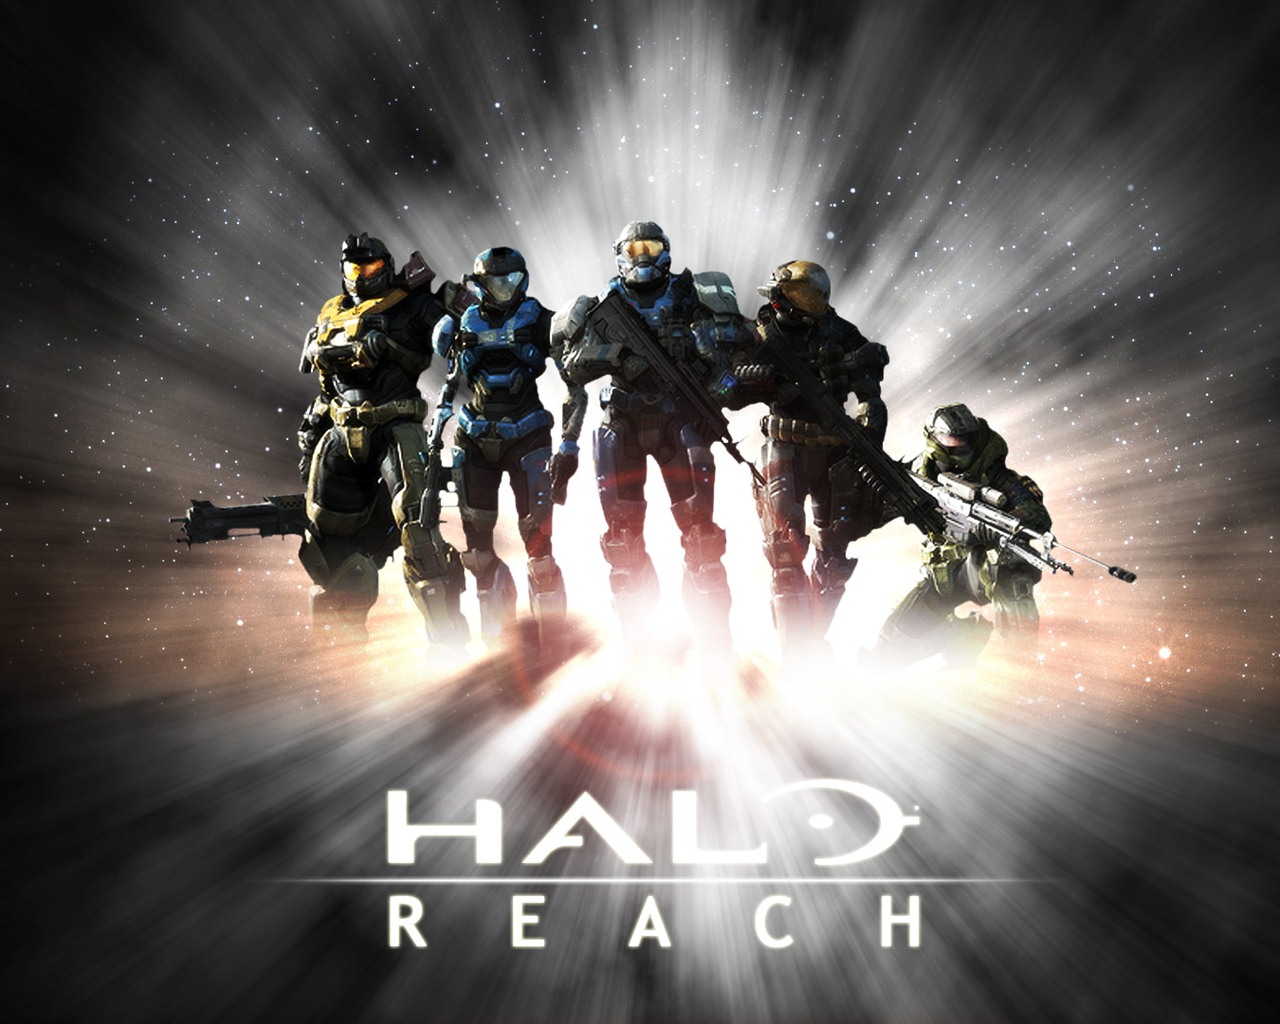 Halo game HD wallpapers #24 - 1280x1024